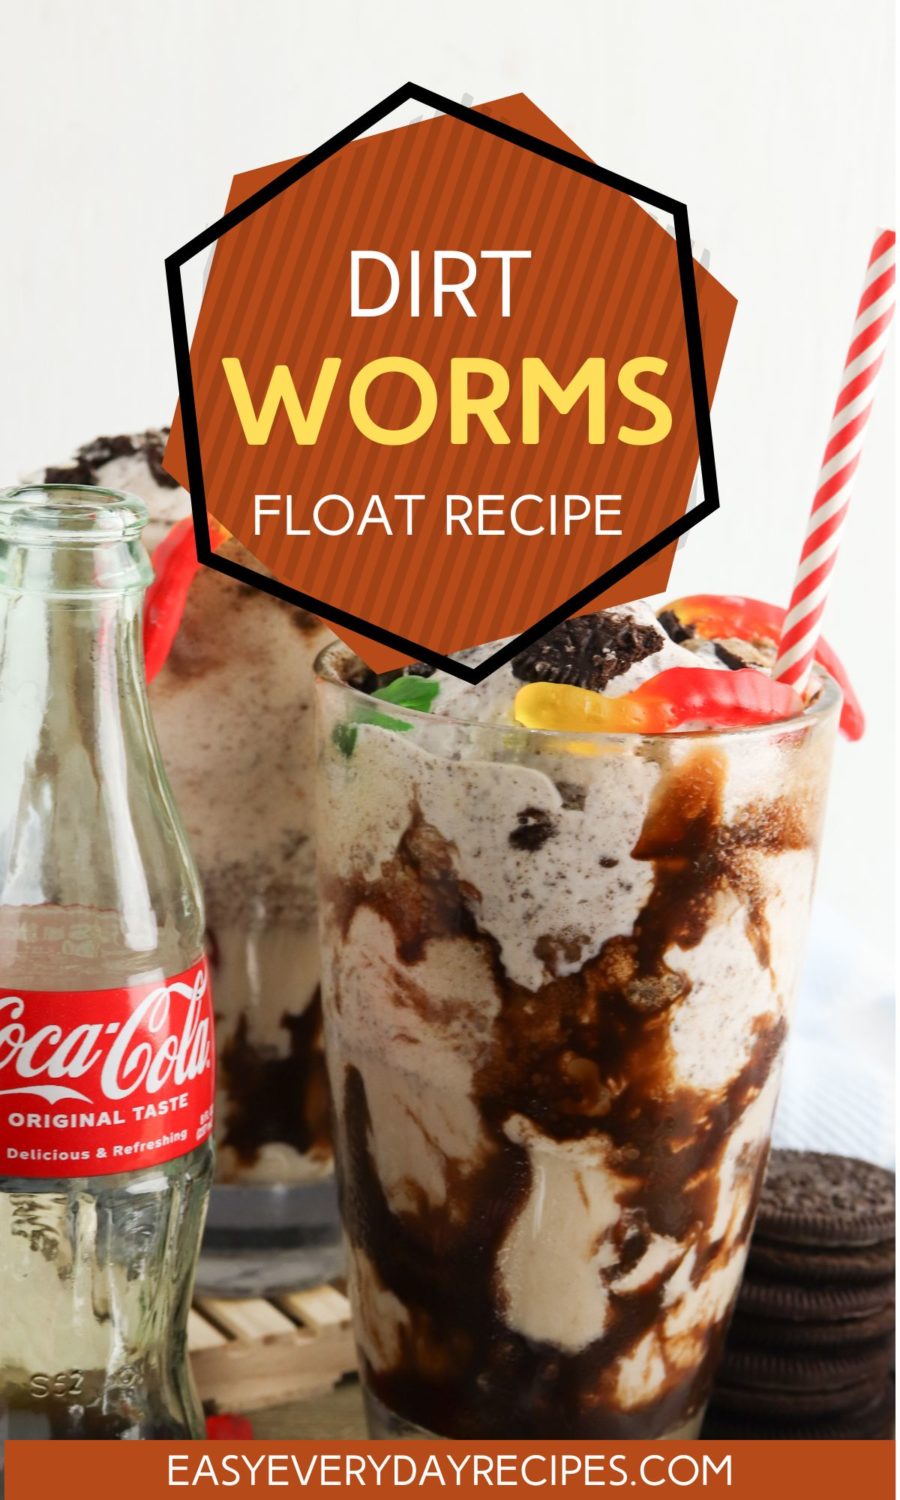 Dirty worms float recipe.